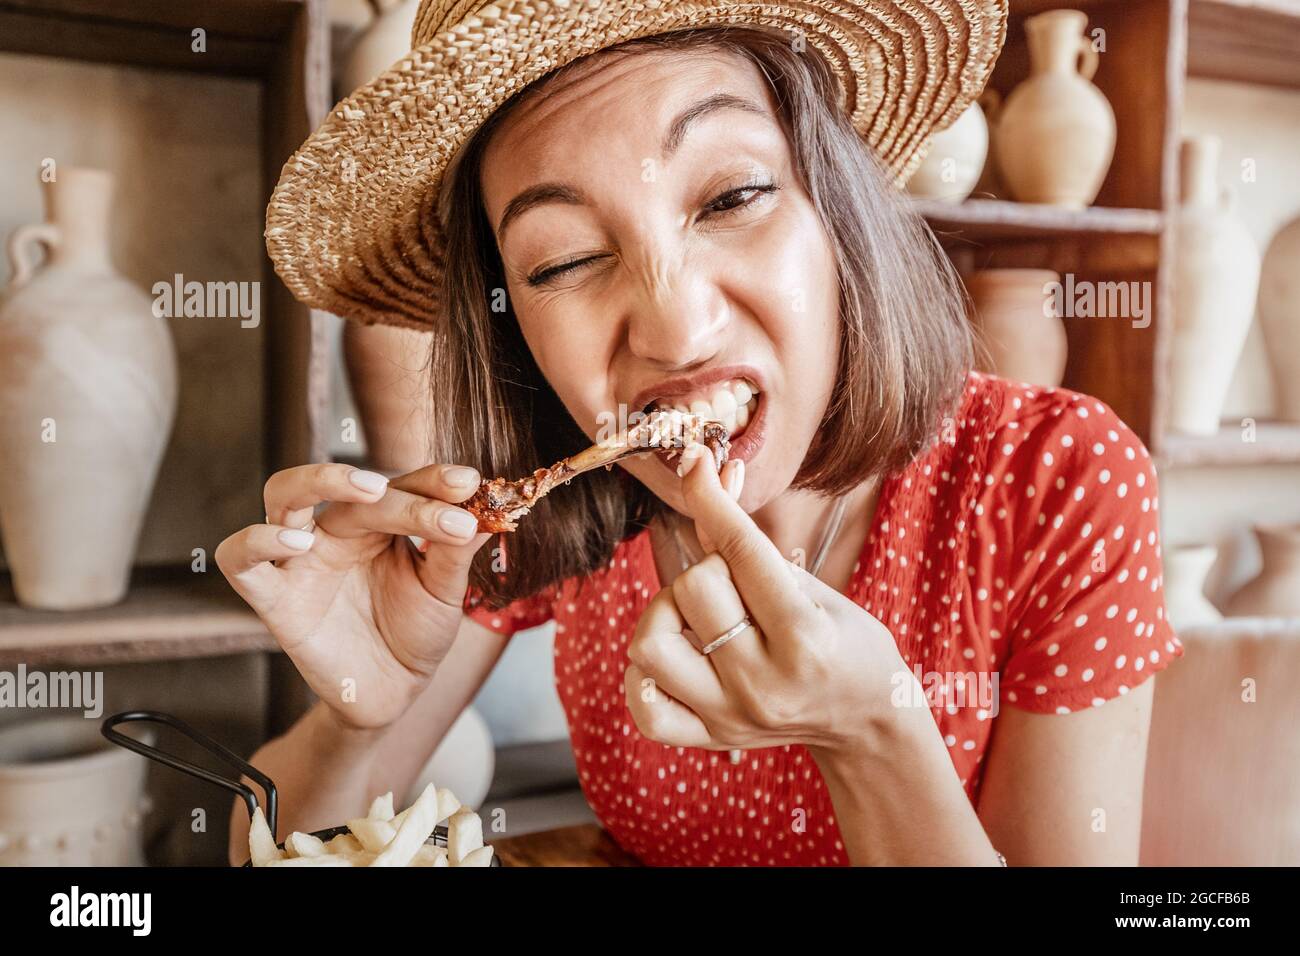 Woman with a strong appetite nibbles the bones of a fried chicken leg. The concept of overeating and gluttony and delicious fatty food Stock Photo